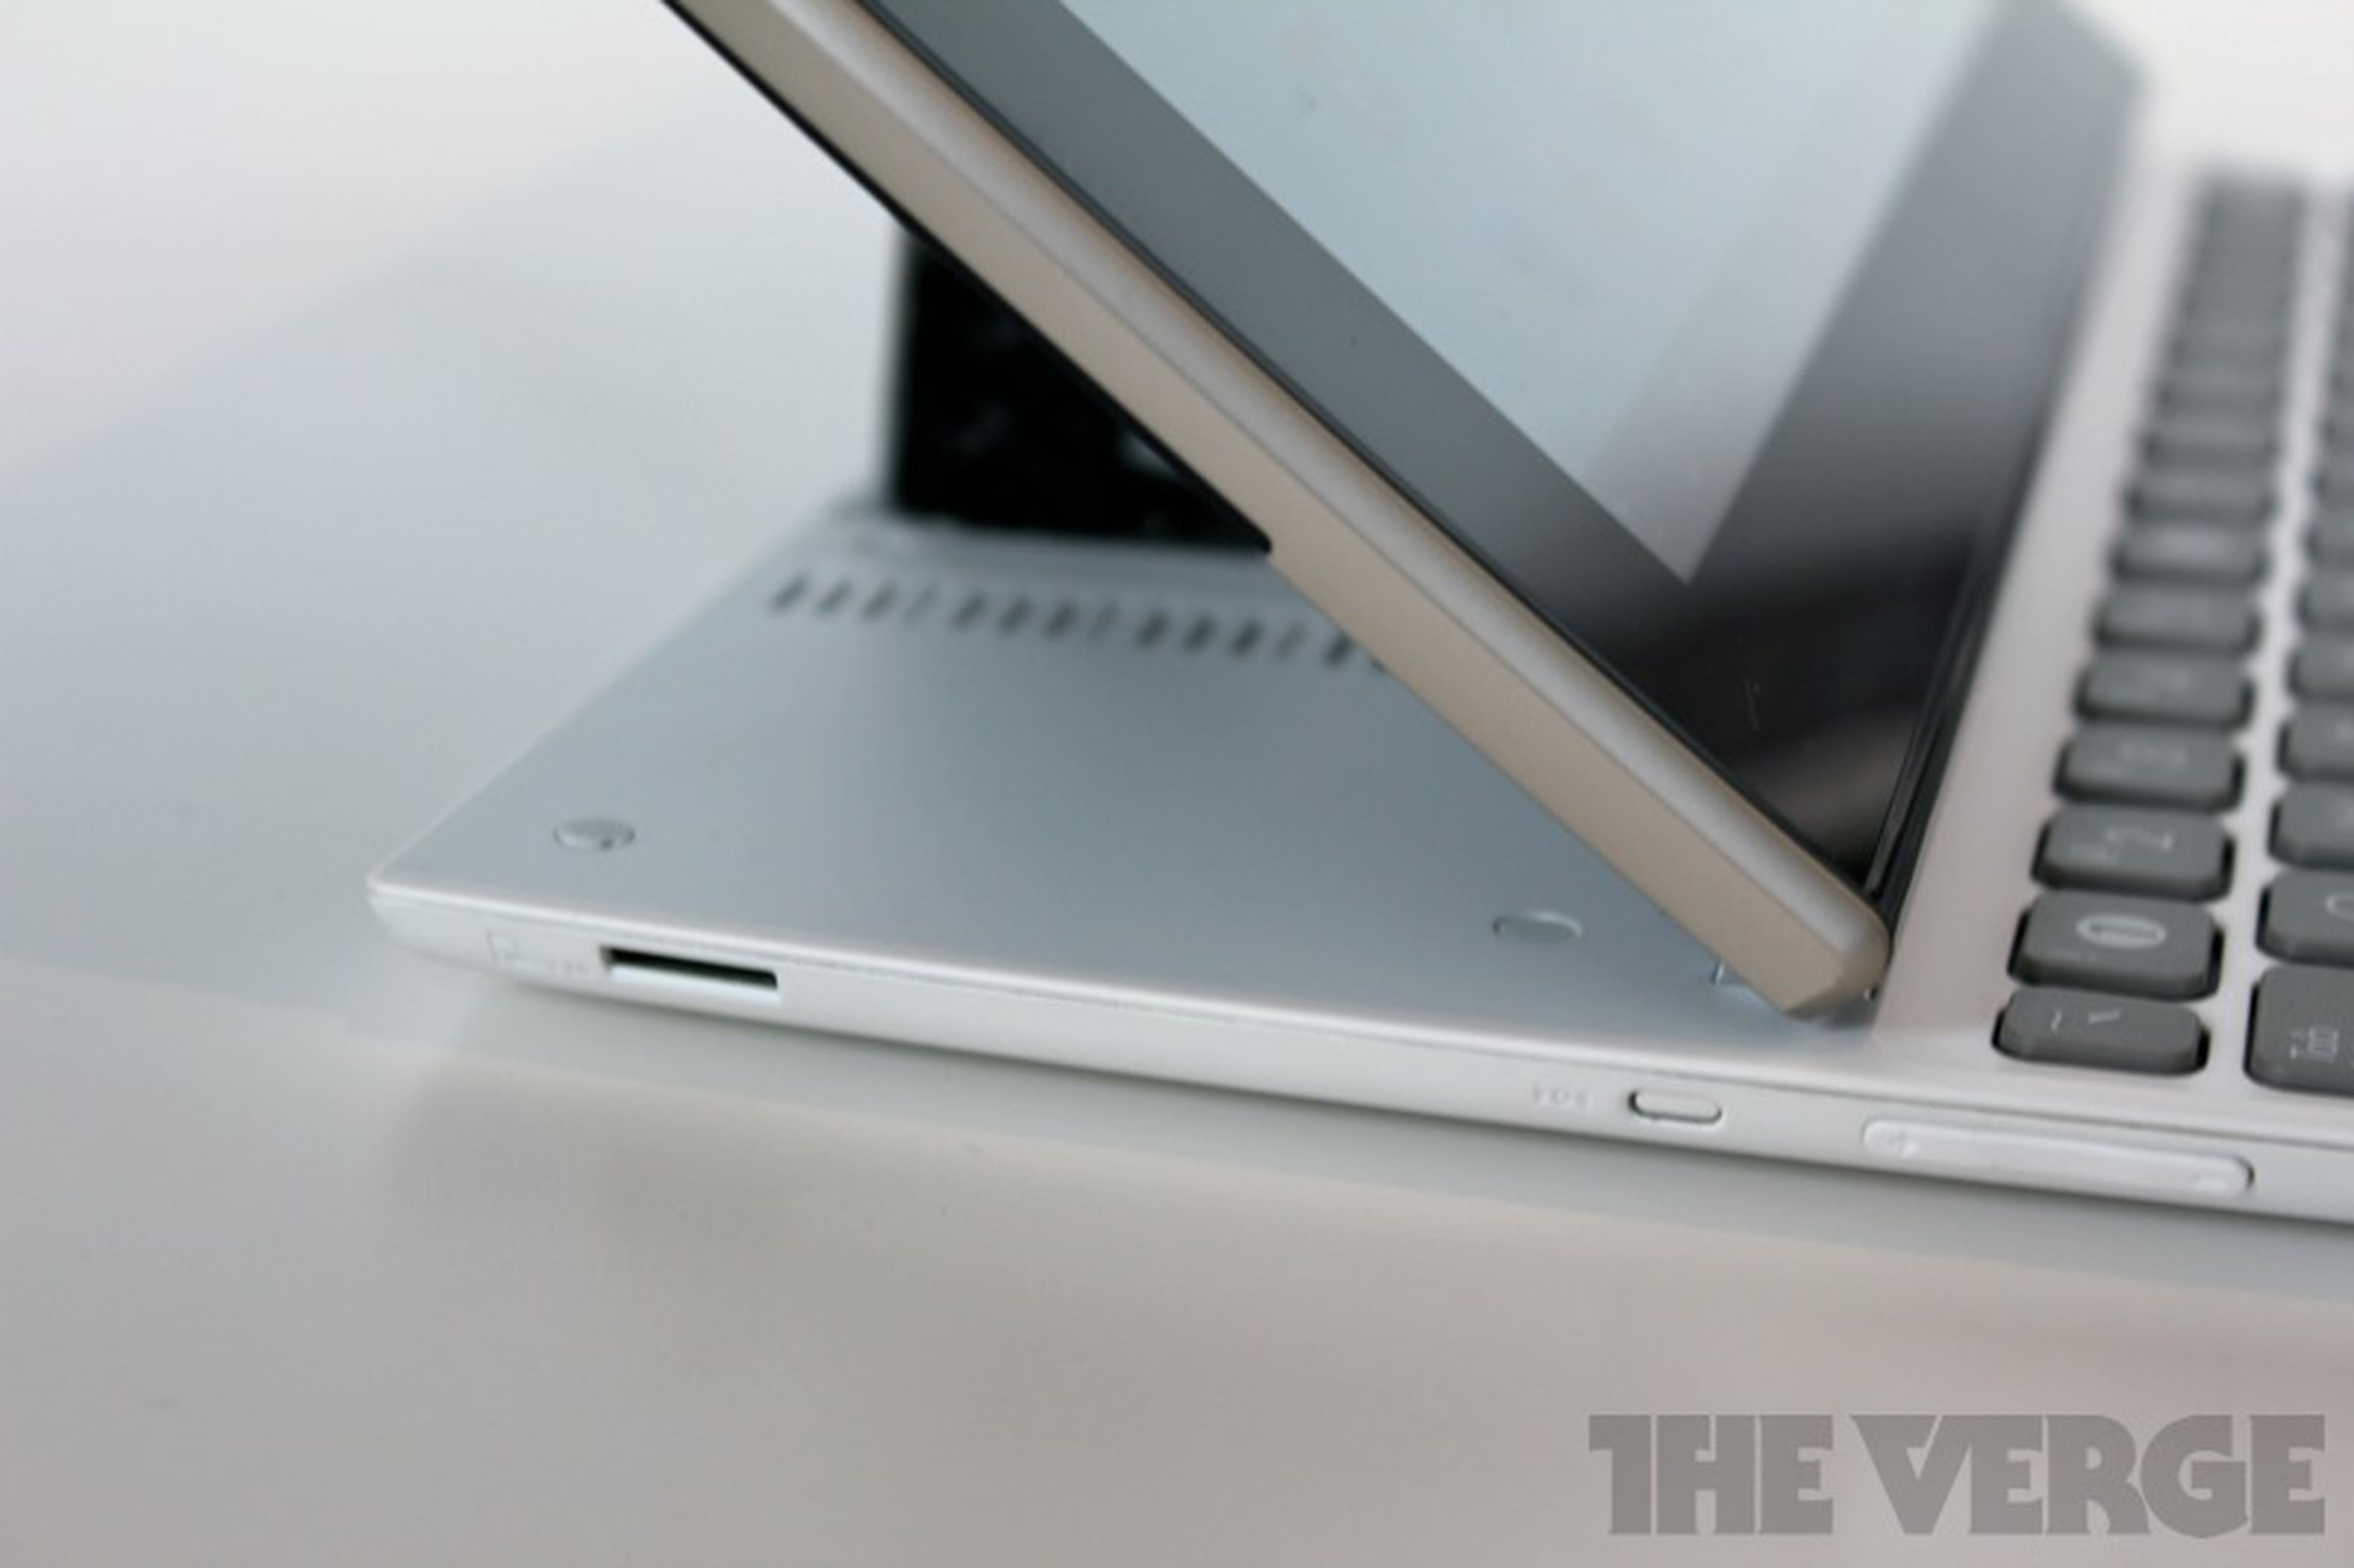 Asus Eee Pad Slider SL101 review pictures